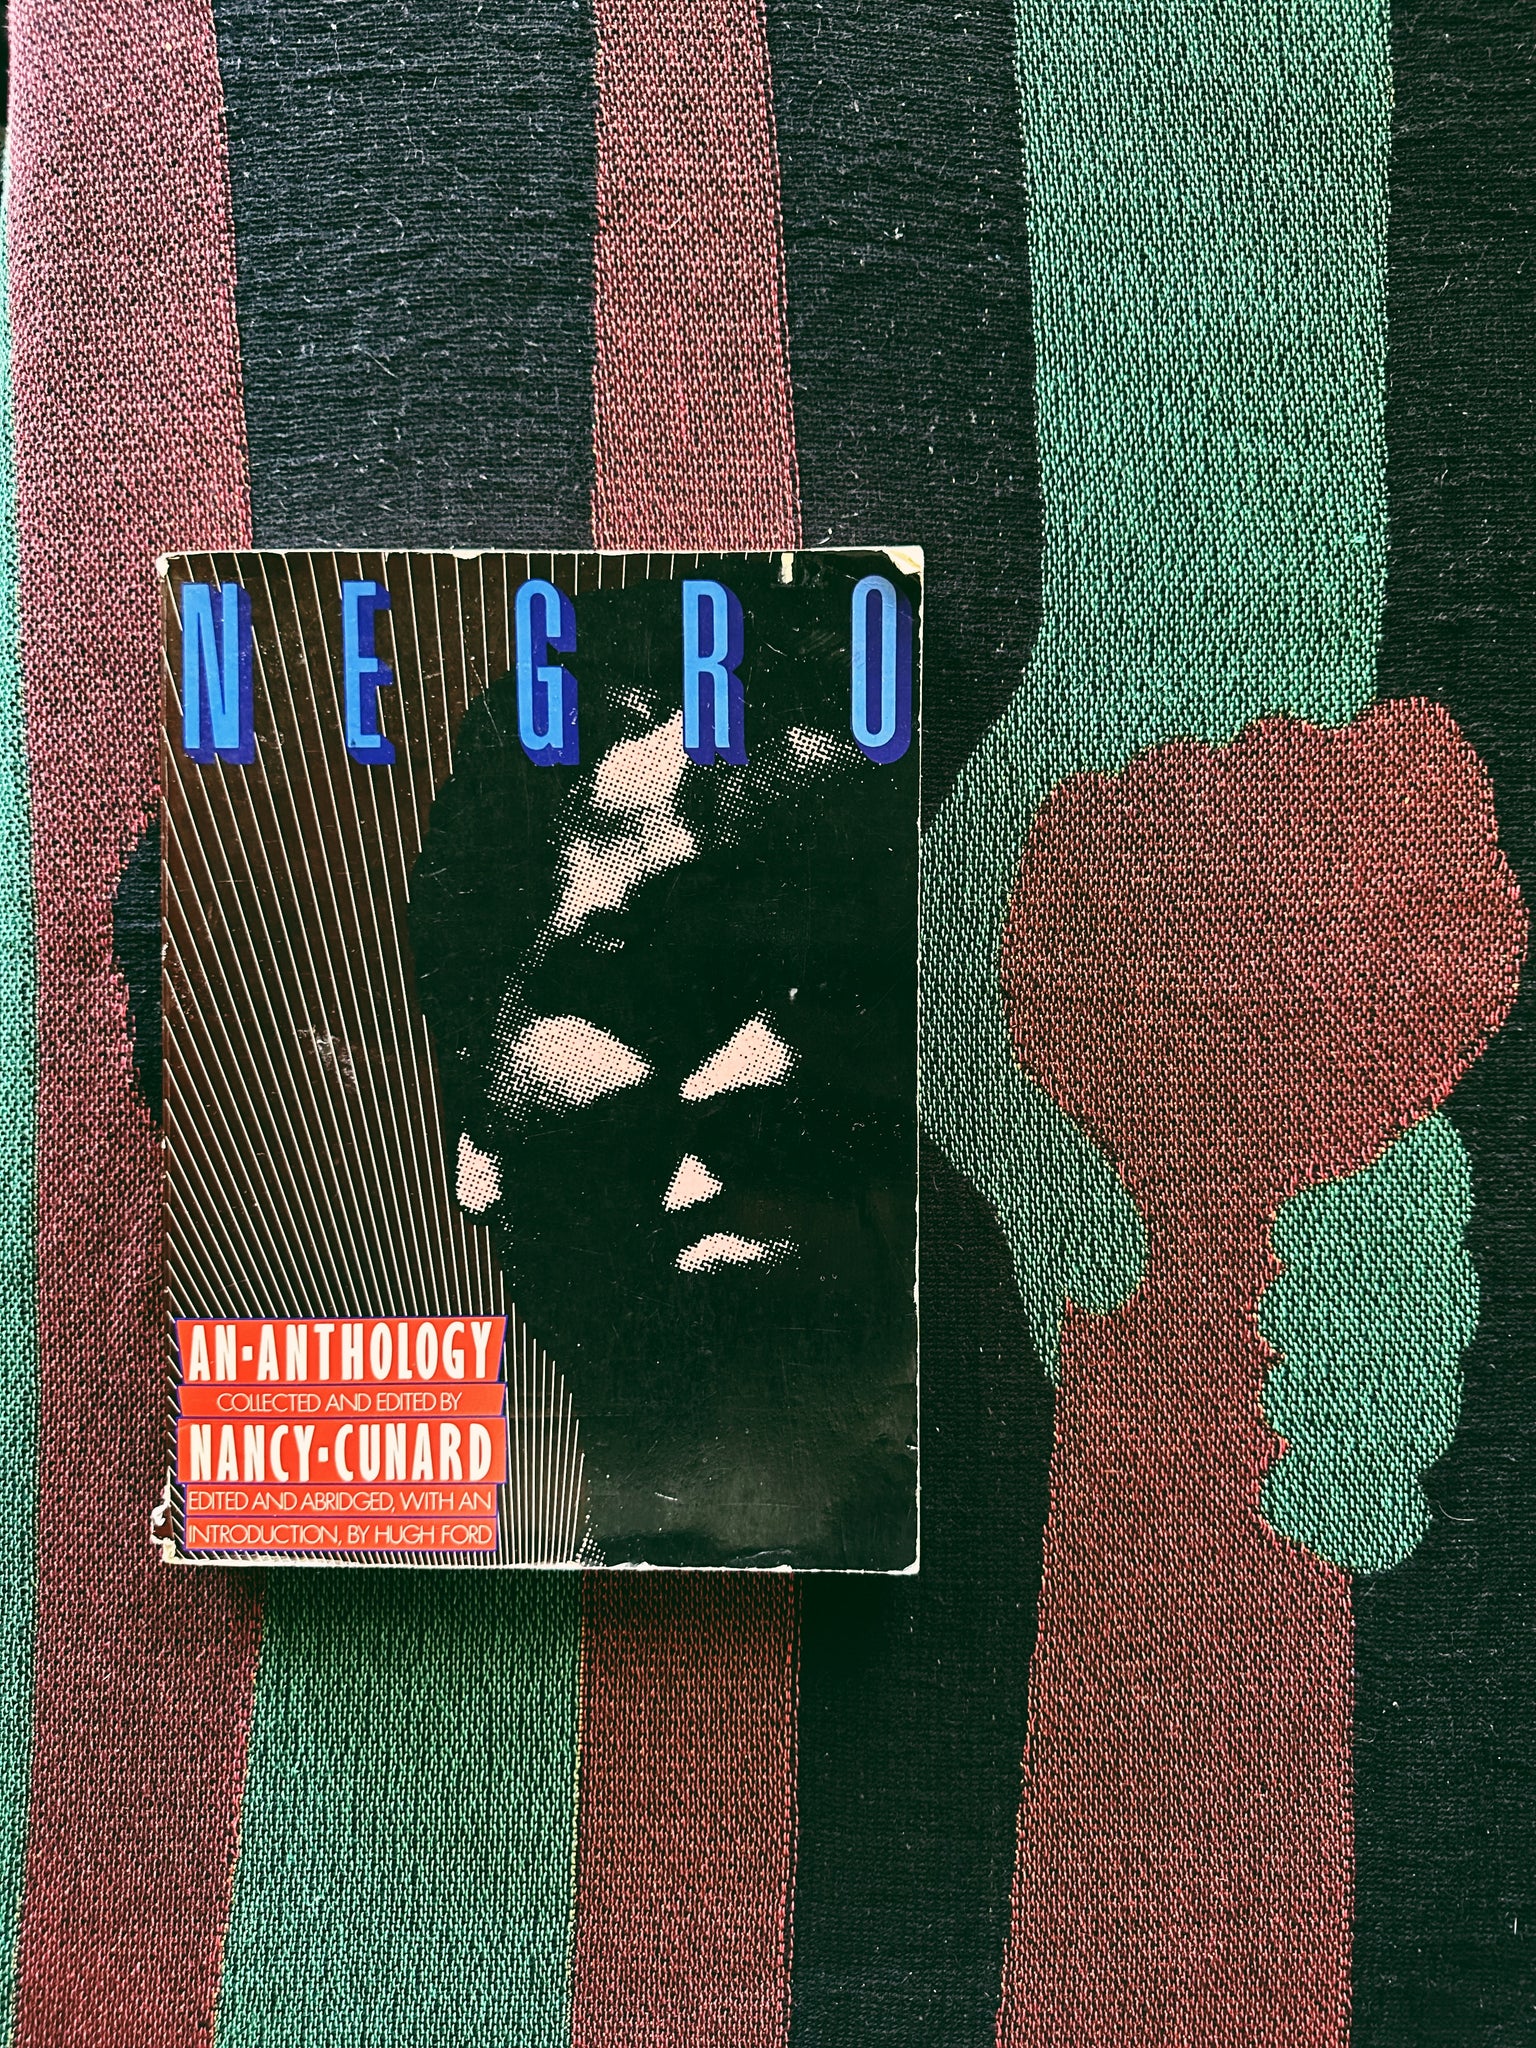 Vintage Softcover “Negro: An Anthology” by Nancy Cunard (1970)